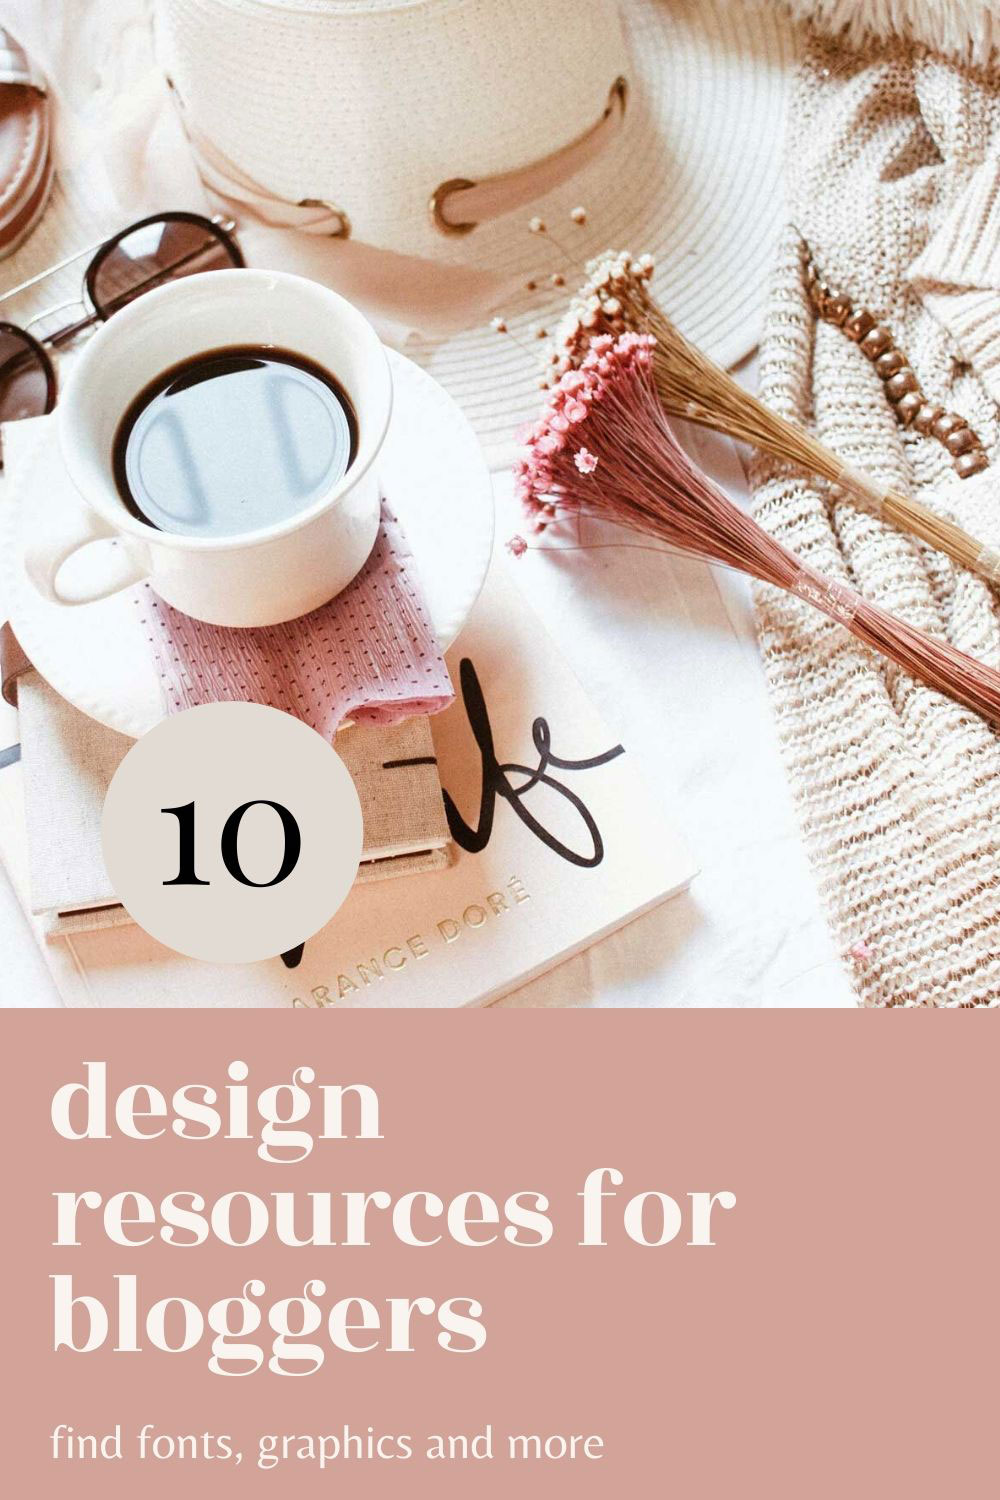 10 design resources for bloggers